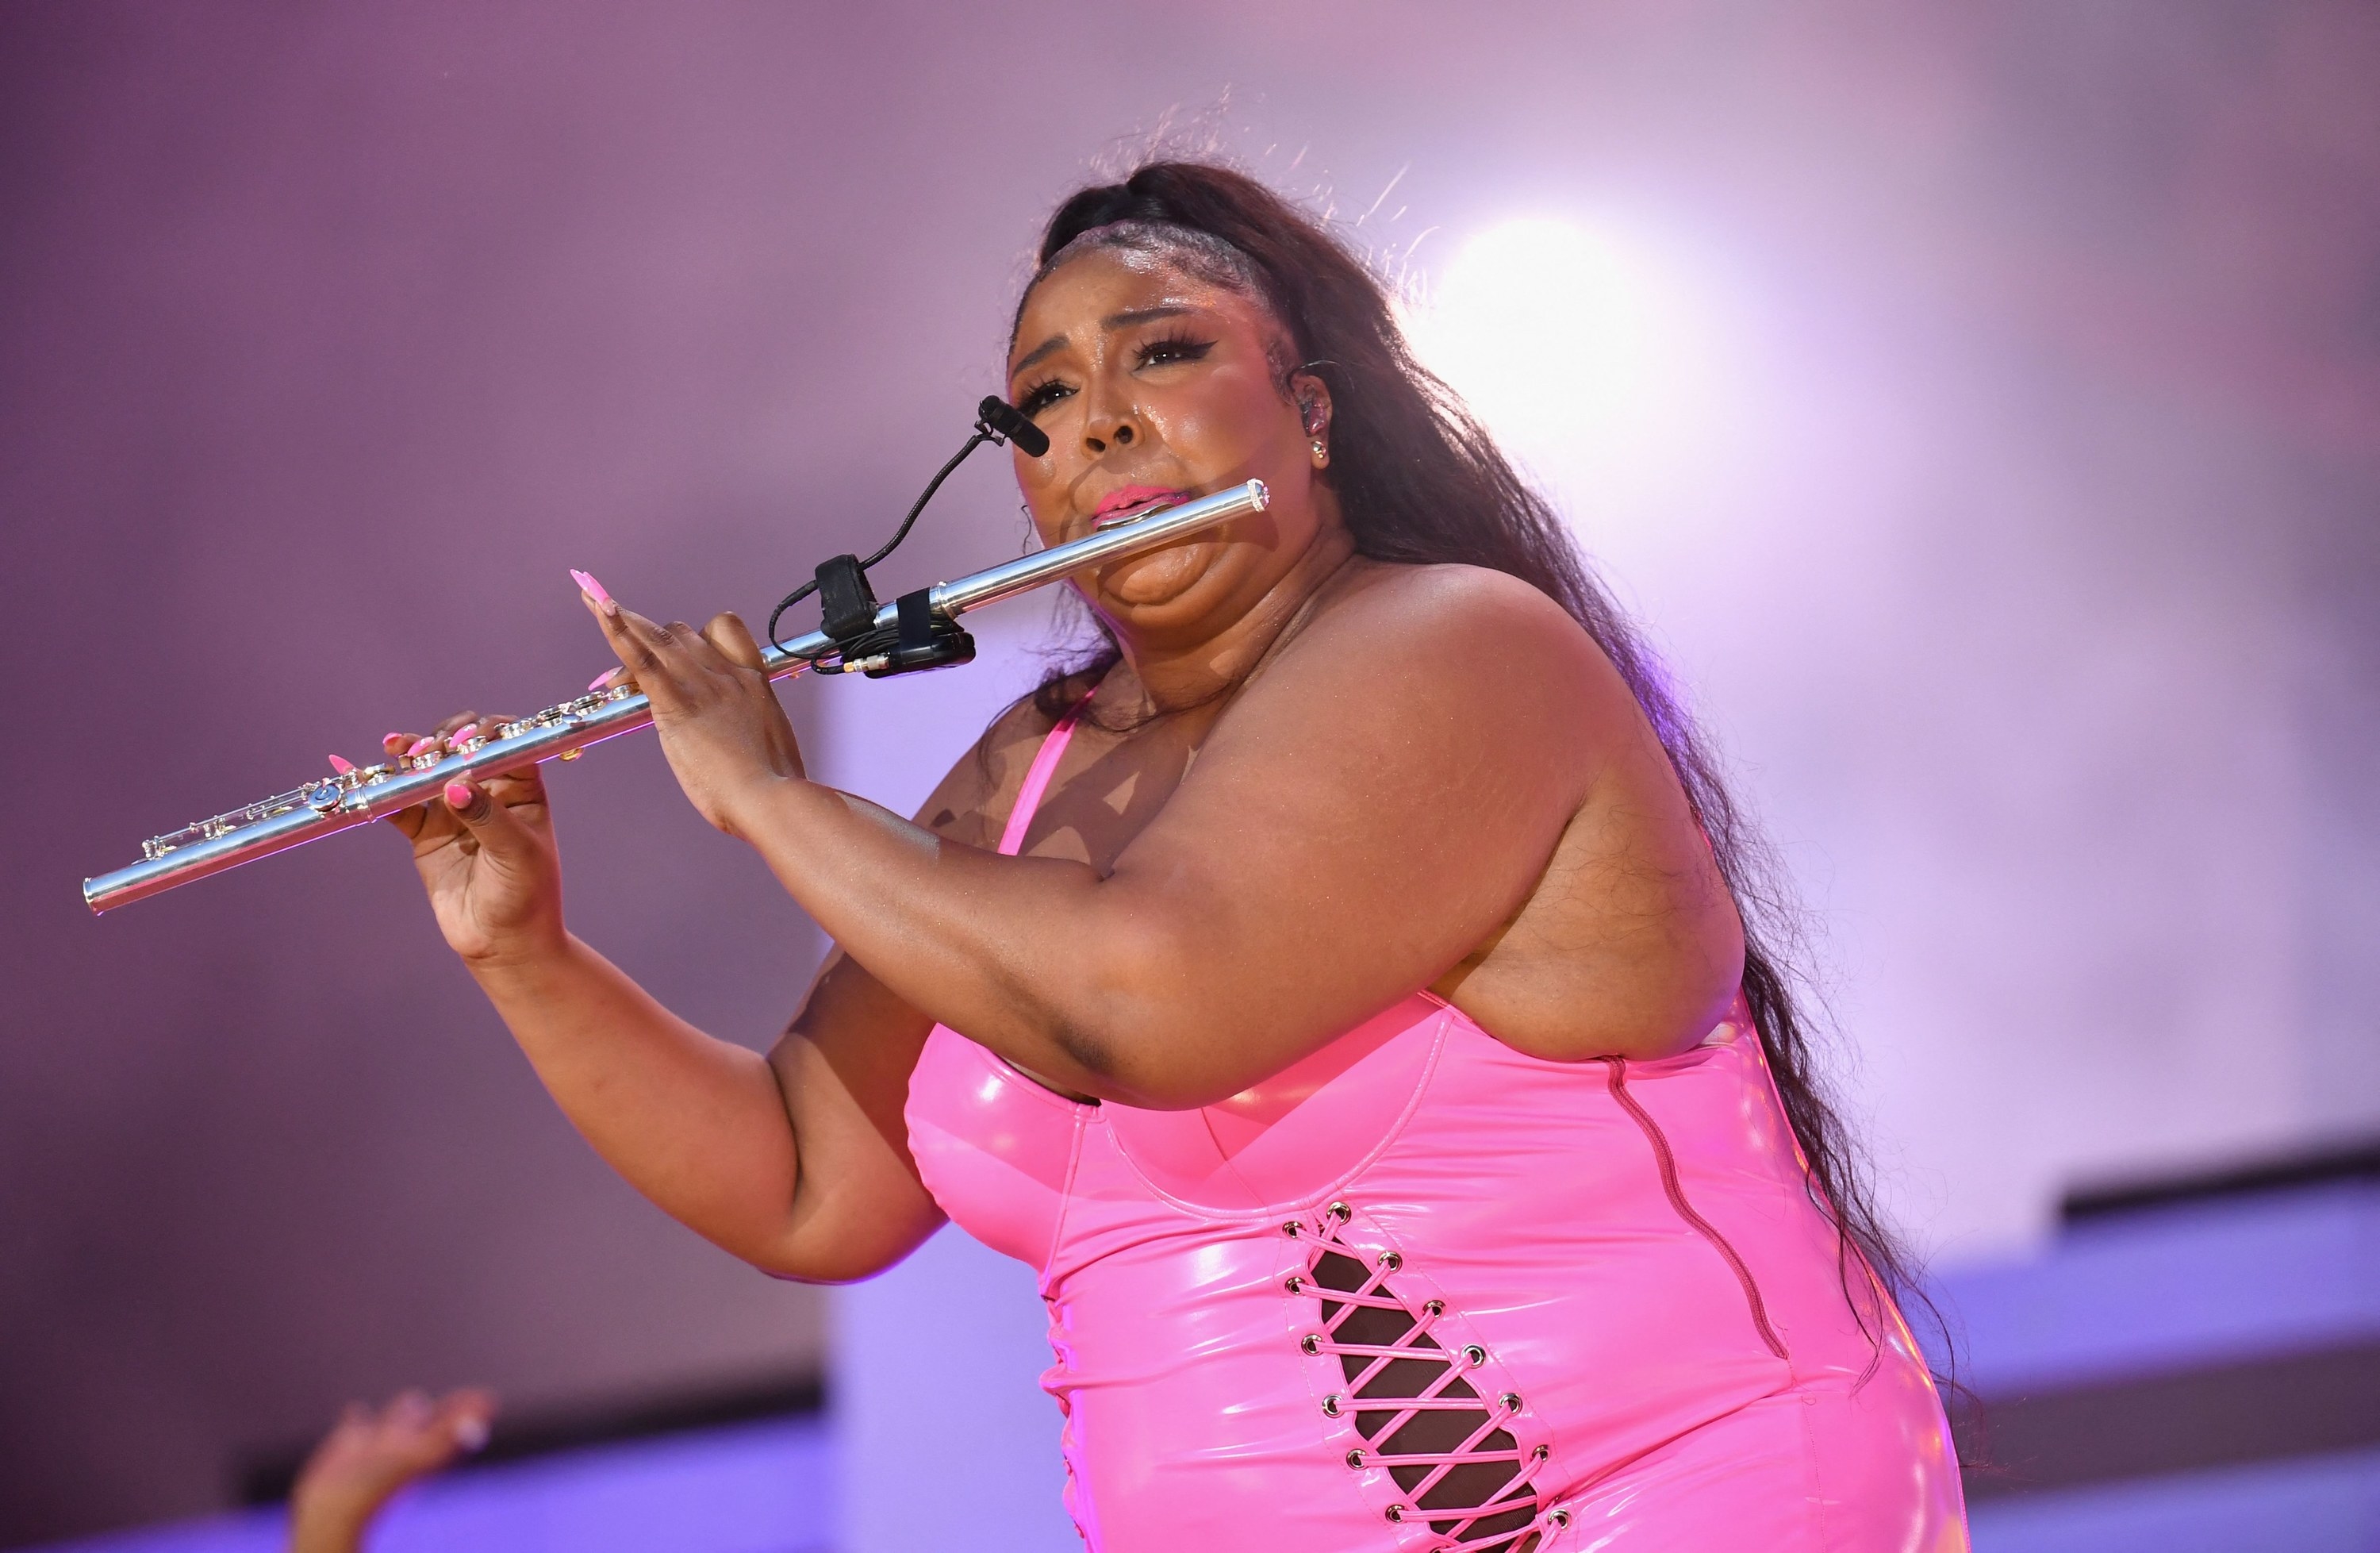 Lizzo plays a flute onstage in a pink bodysuit